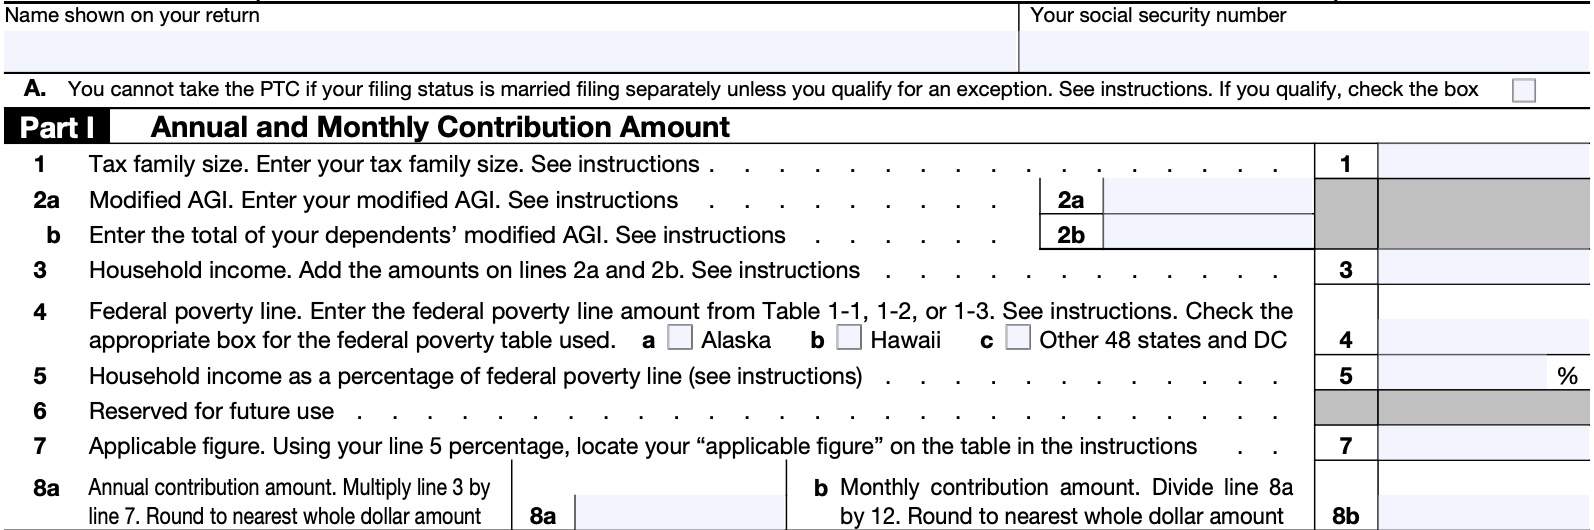 irs form 8962 part i: annual and monthly contribution amount